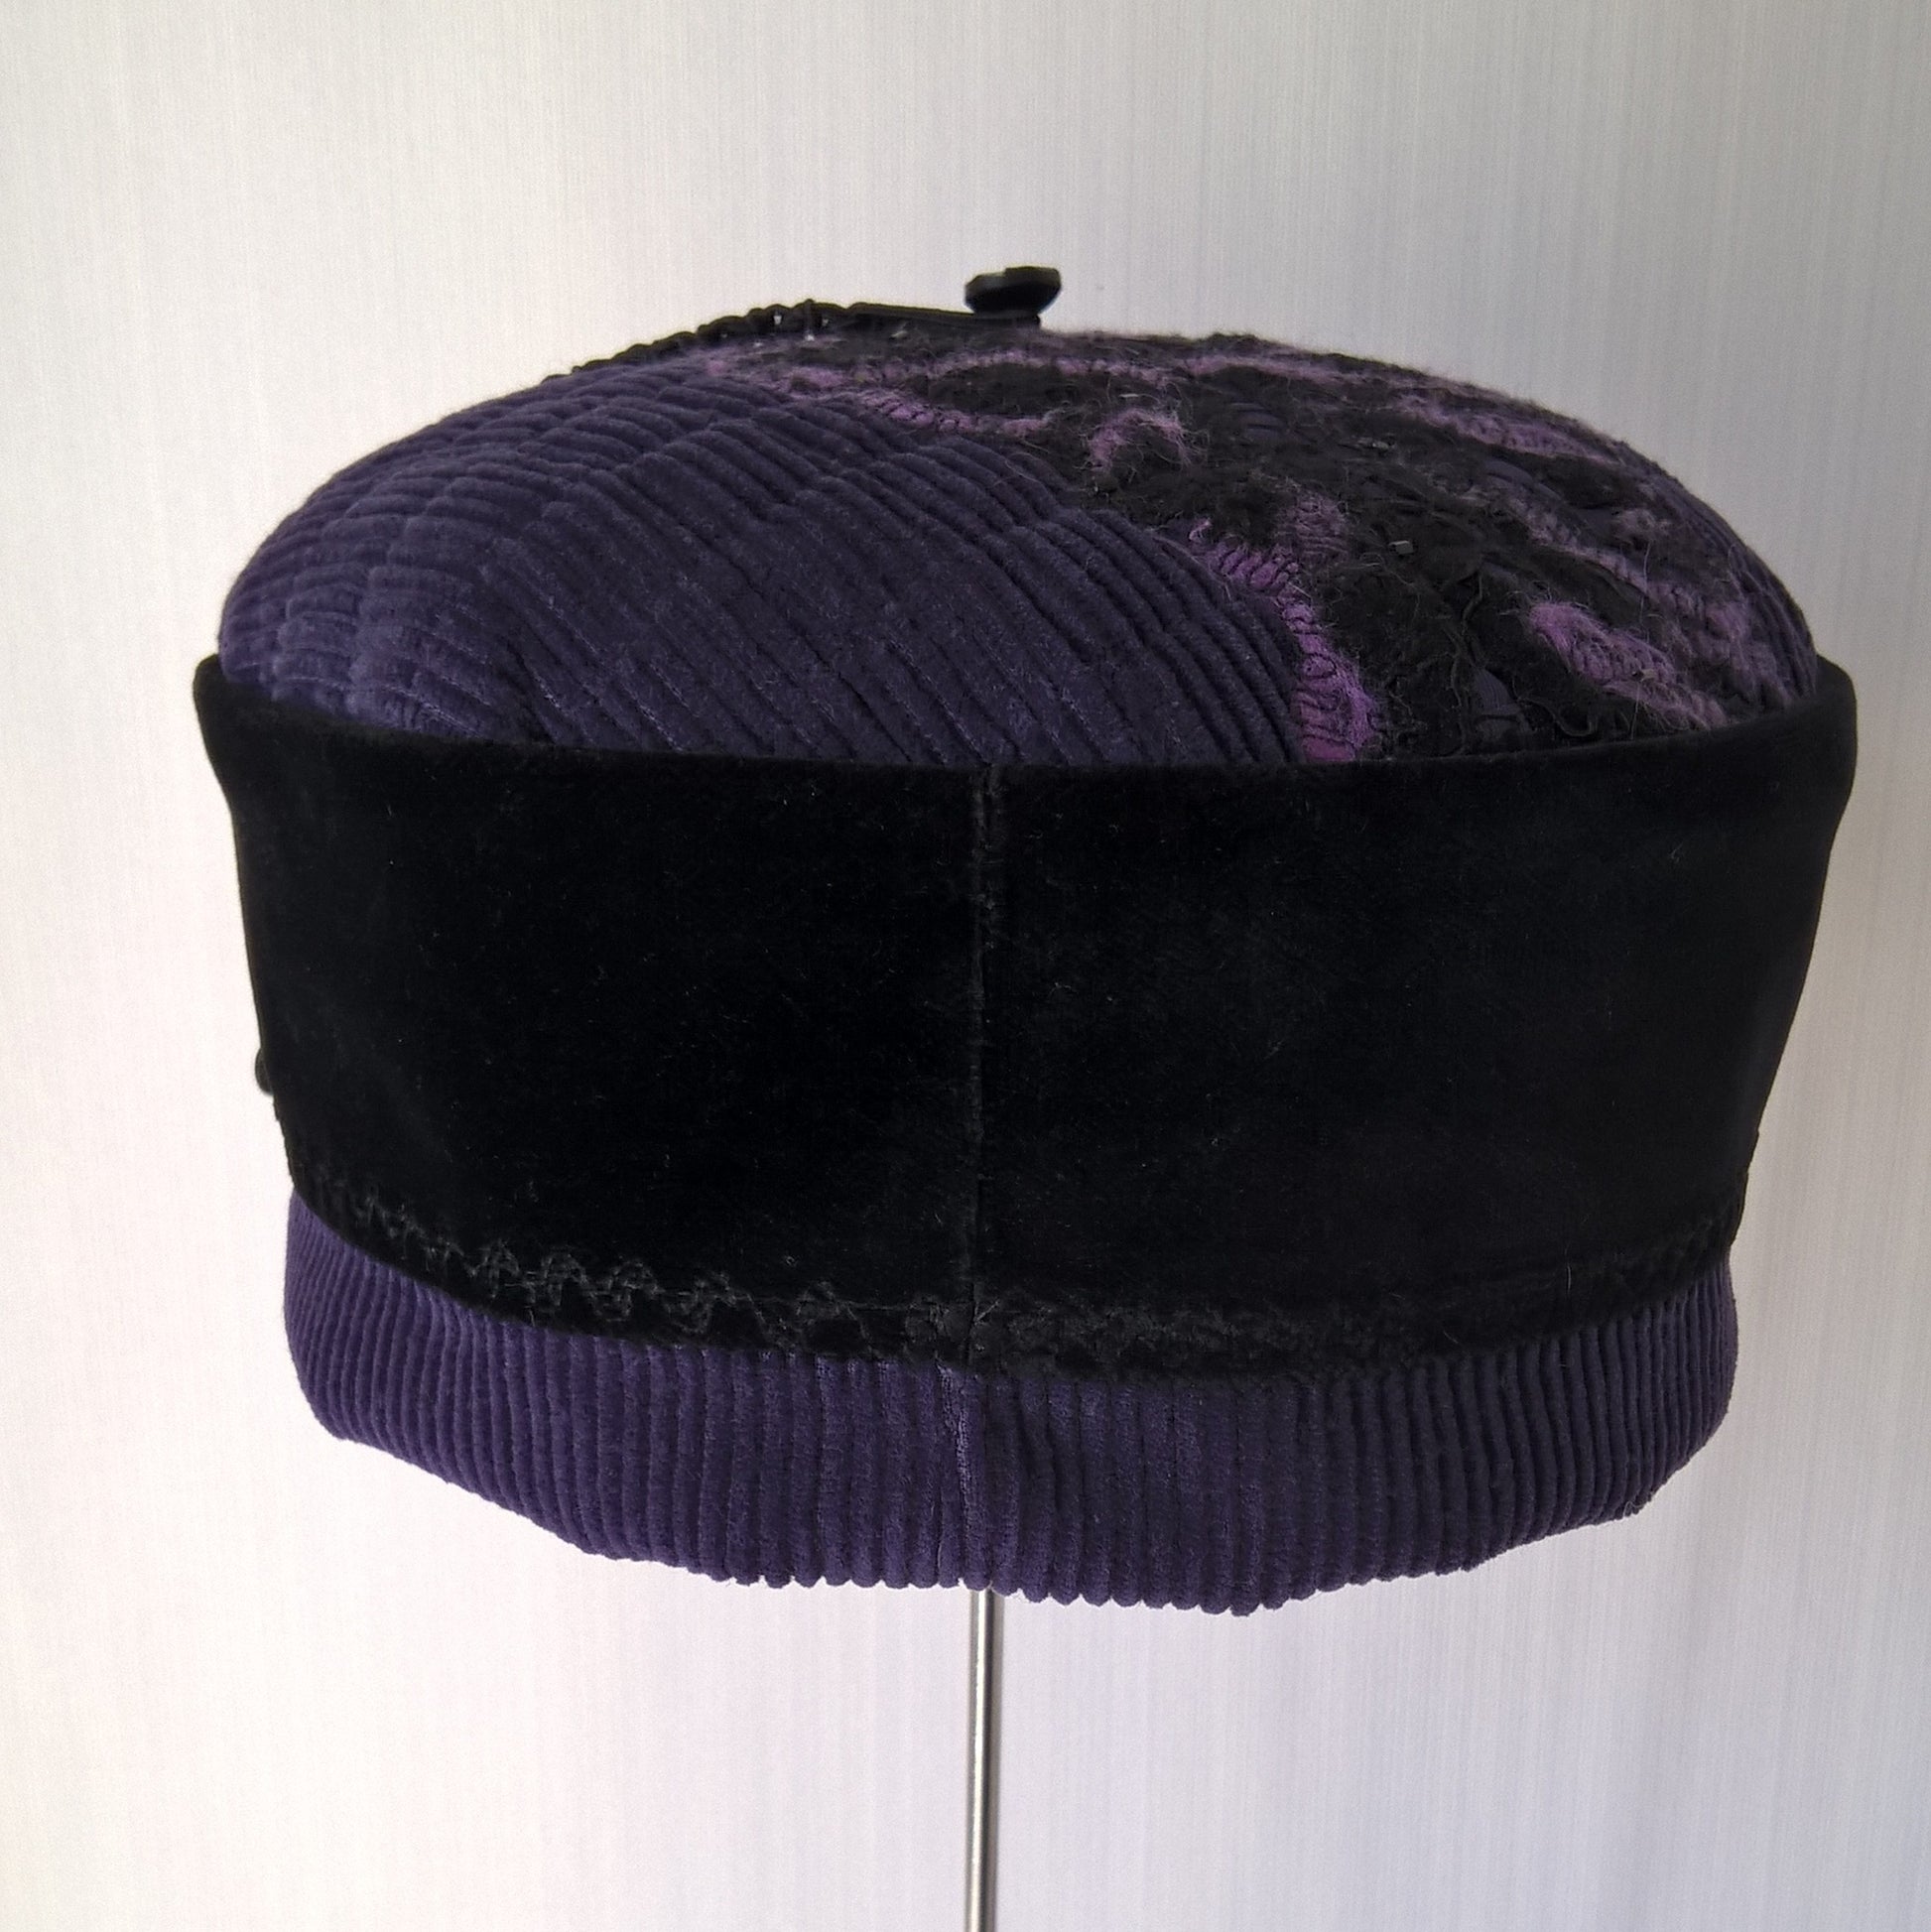 Back view of purple and black smoking cap